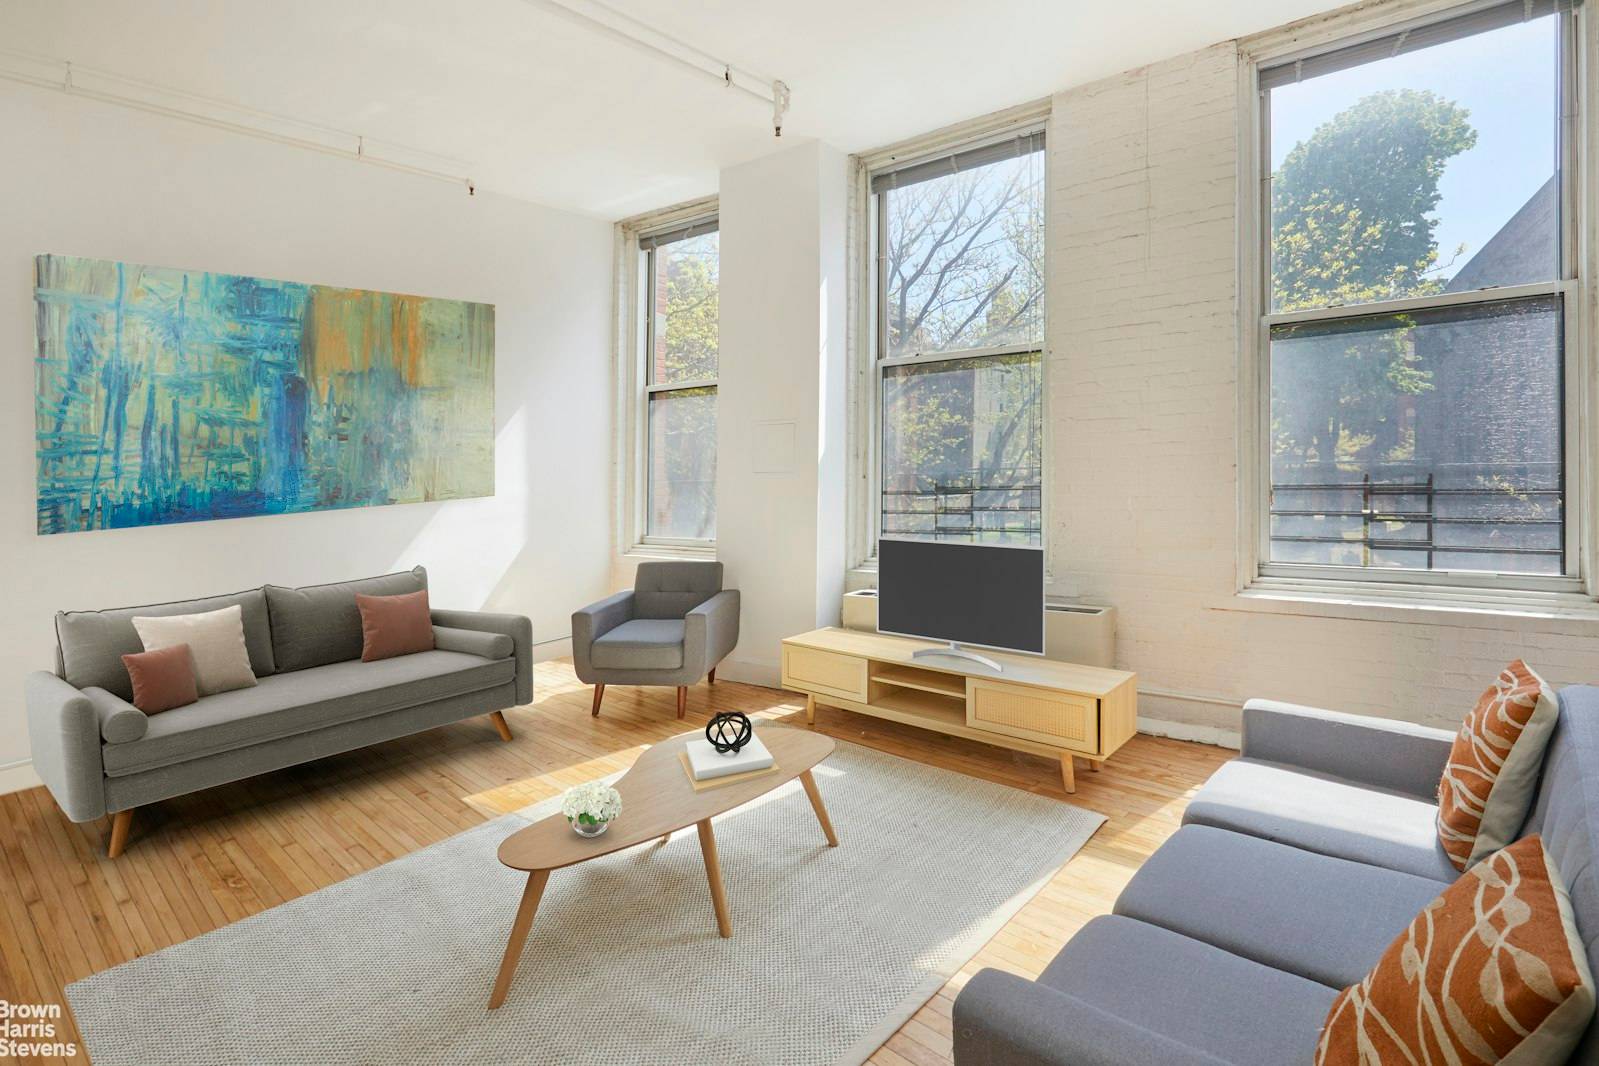 This exceptional Soho loft is boasting soaring ceilings, custom handcrafted woodworking throughout, exposed beams, and other original touches.